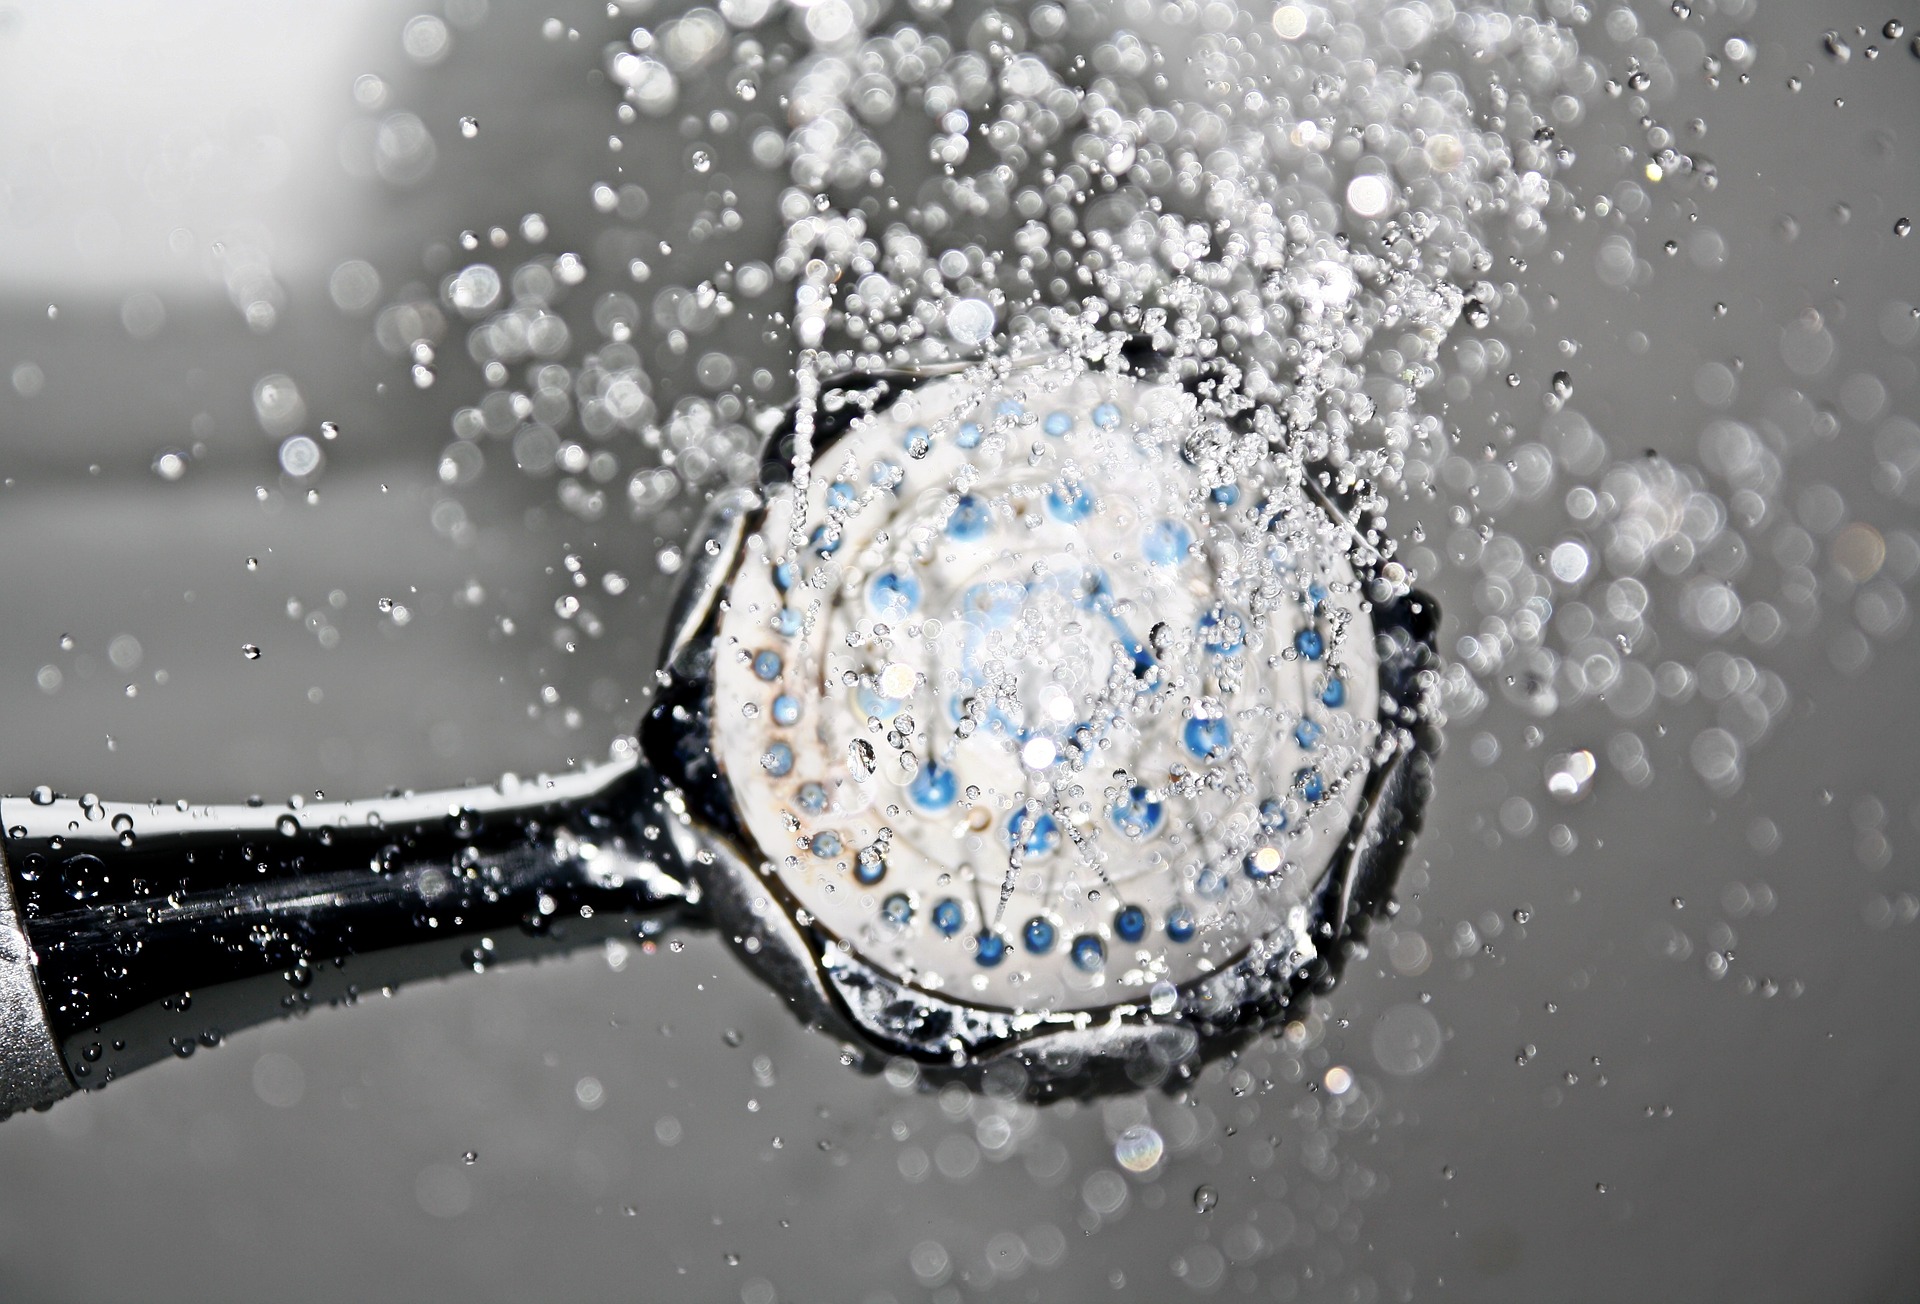 How to get a hot shower that stays hot